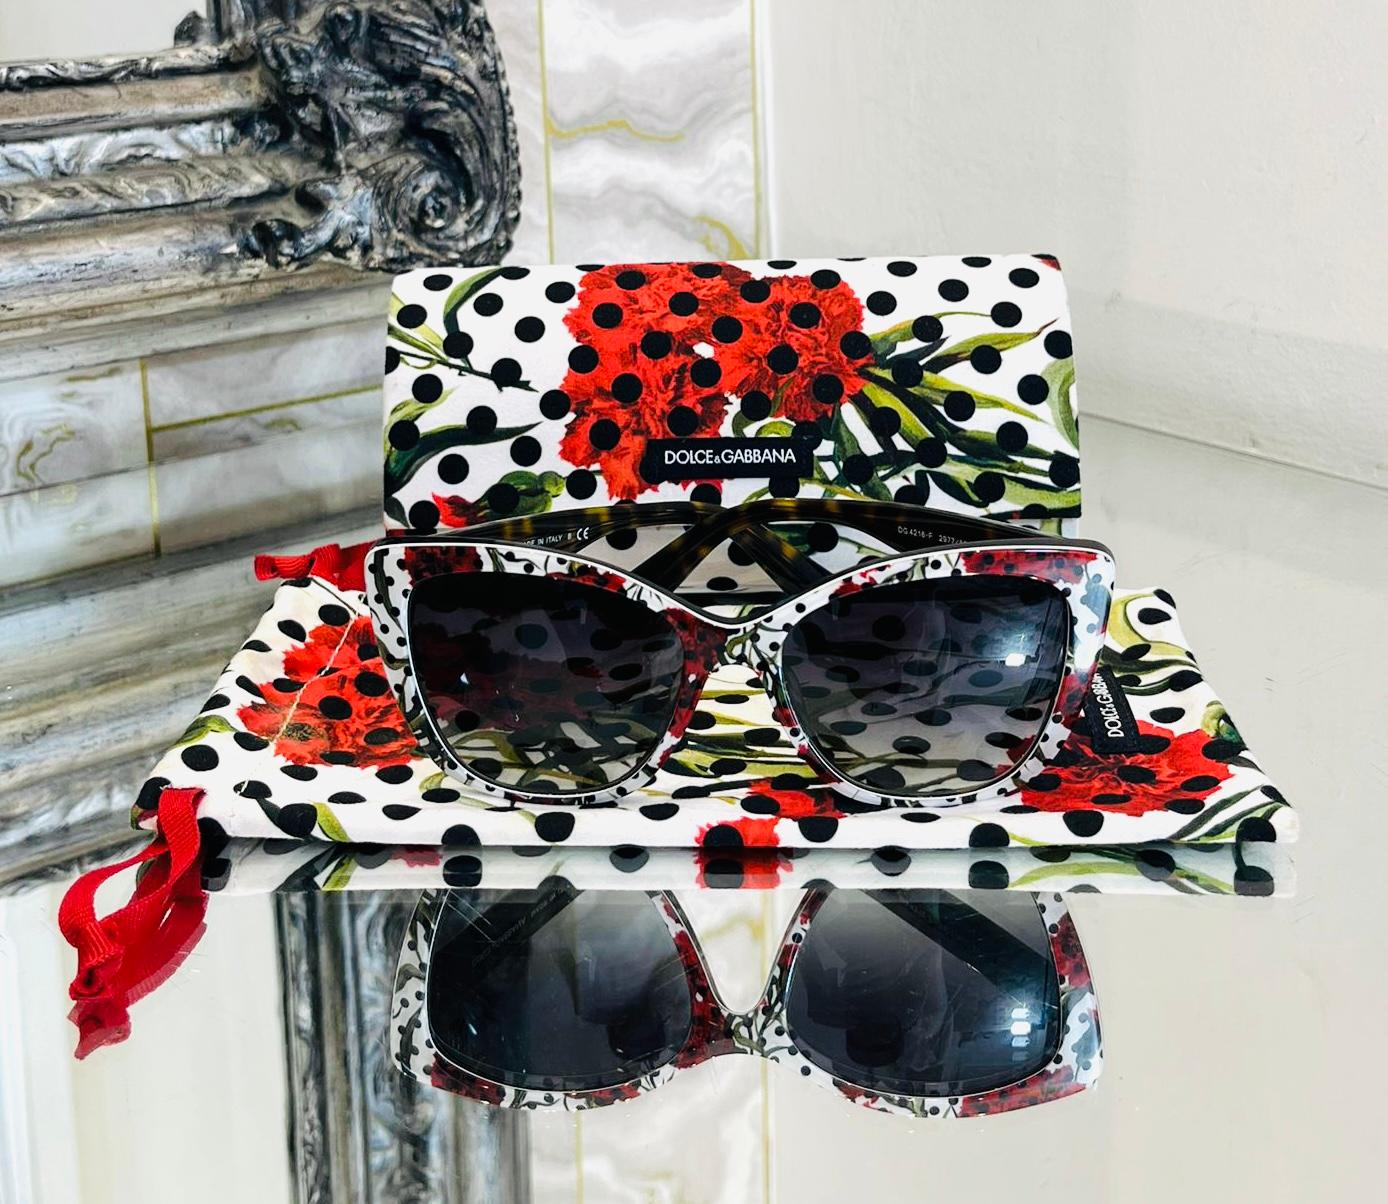 Dolce & Gabbana Rose-Print Sunglasses

Oversized, white sunglasses designed with black polka dot and red roses print.

Featuring cat-eye silhouette and gold 'DG' logo to the arms.

Detailed with grey, gradient lenses.

Size – One Size

Condition –